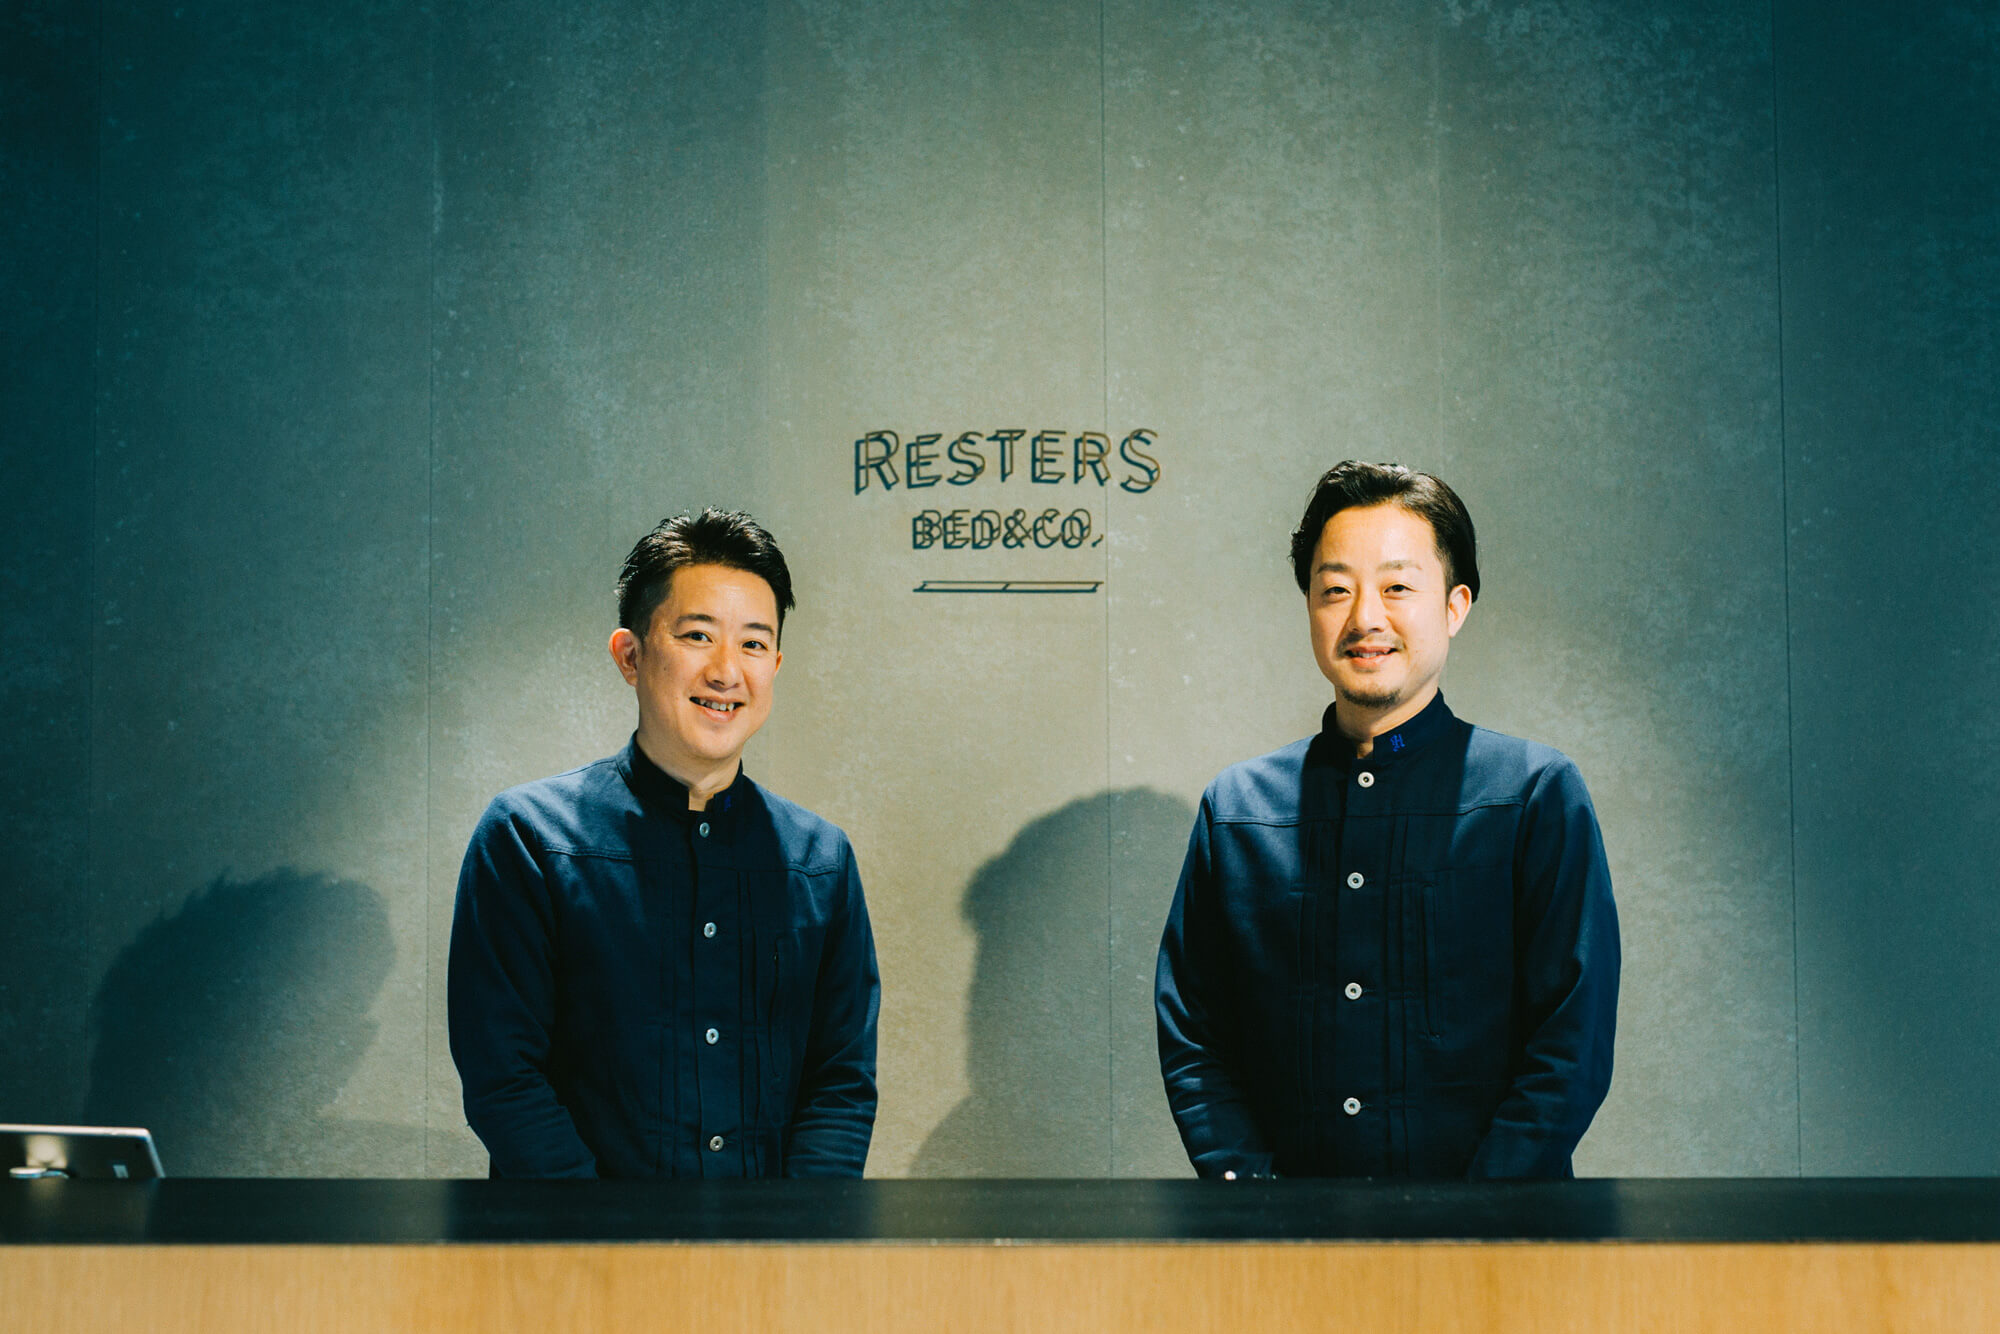 RESTERS BED＆CO.